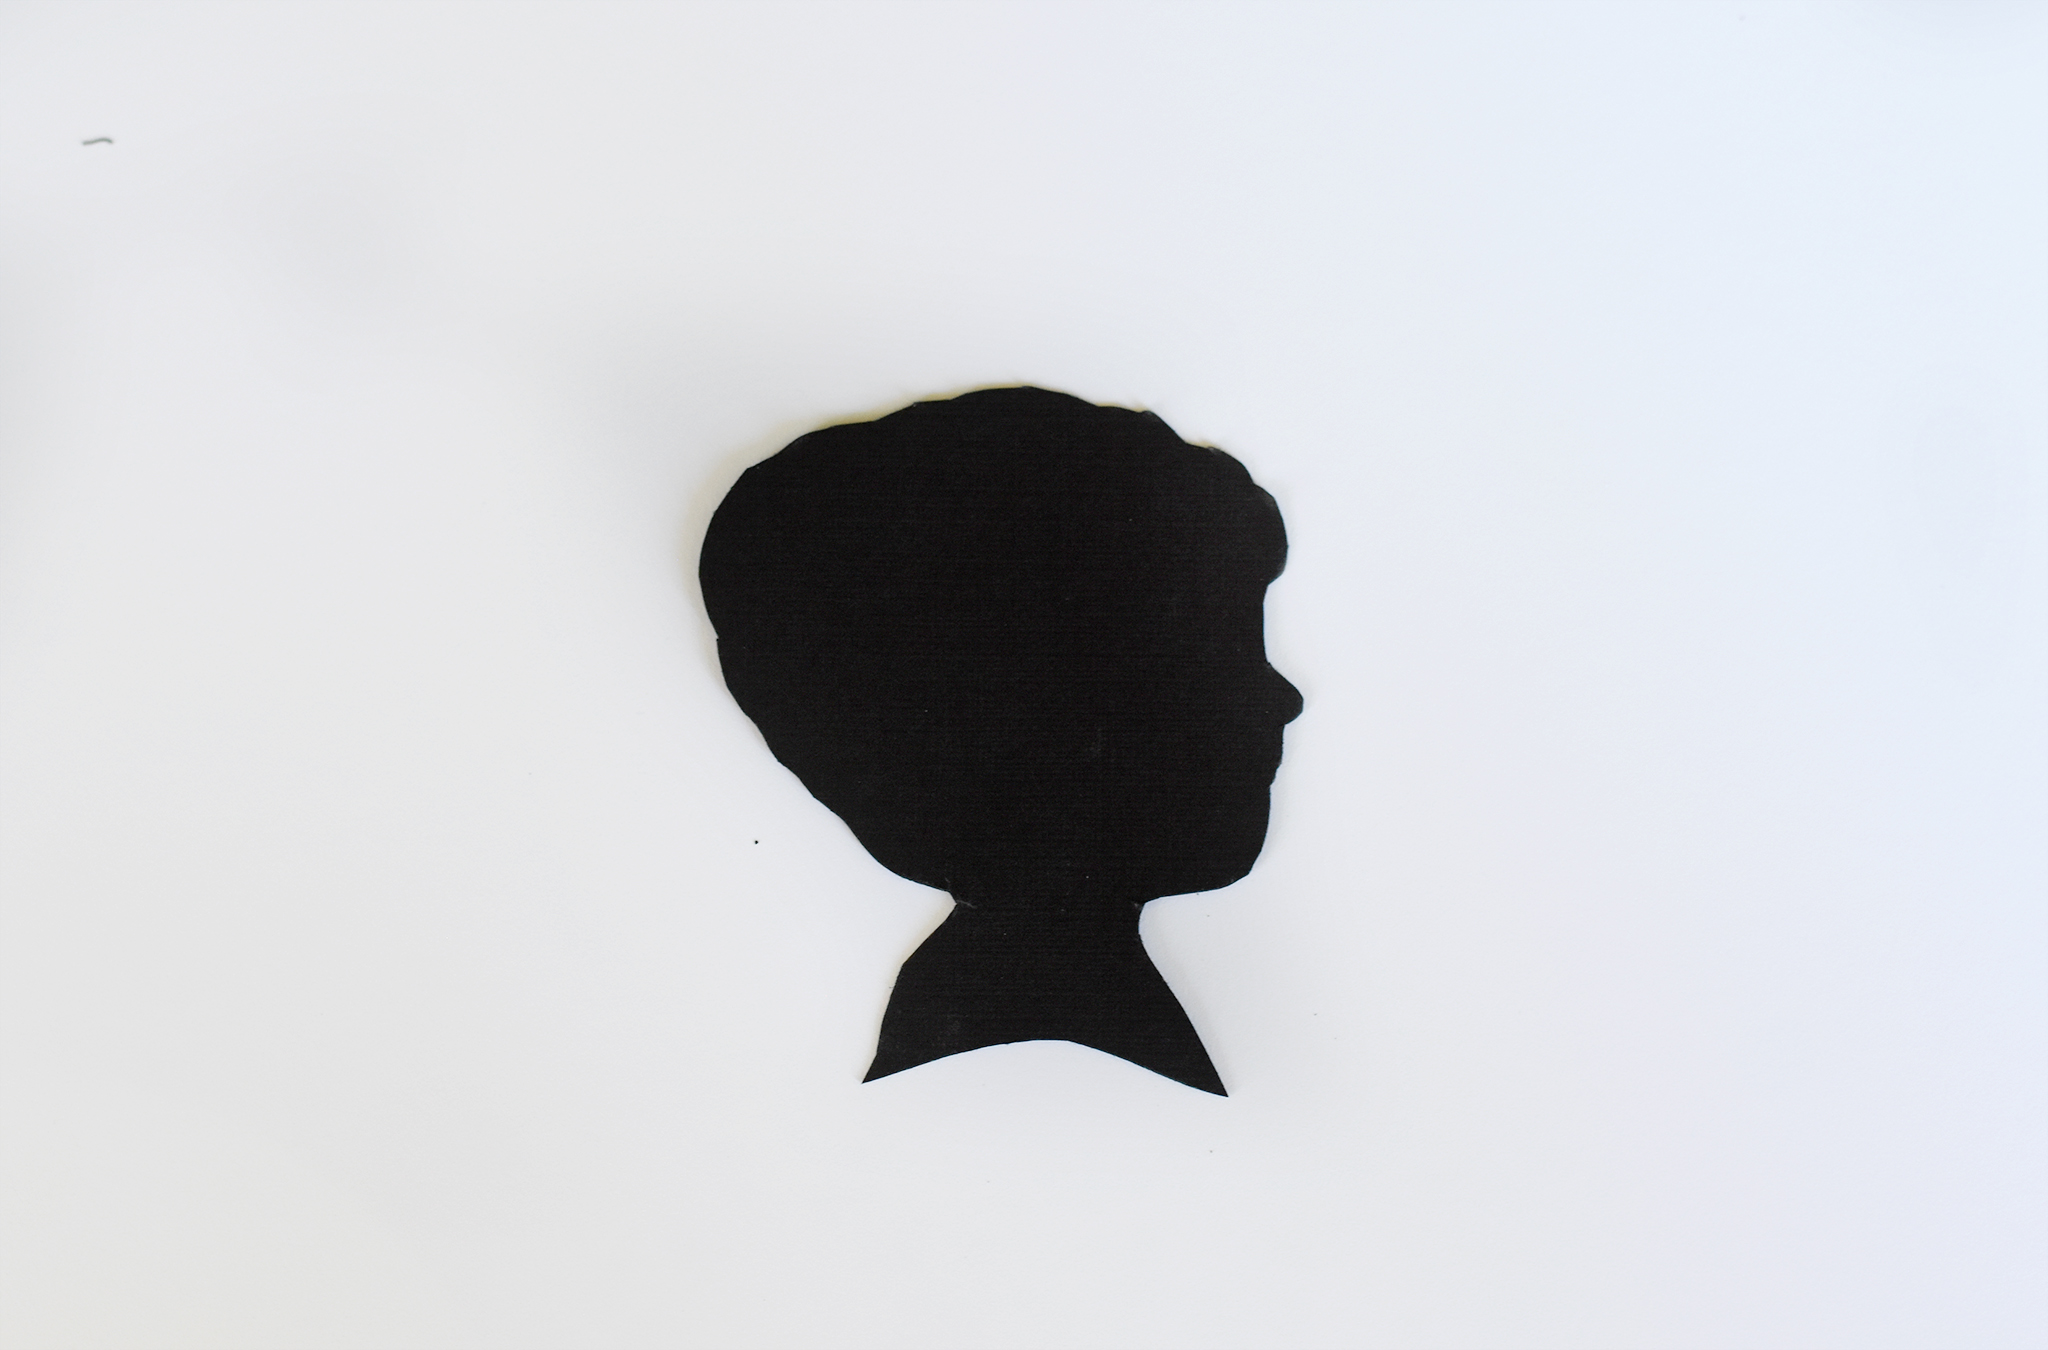 Mount your silhouette onto a card stock background